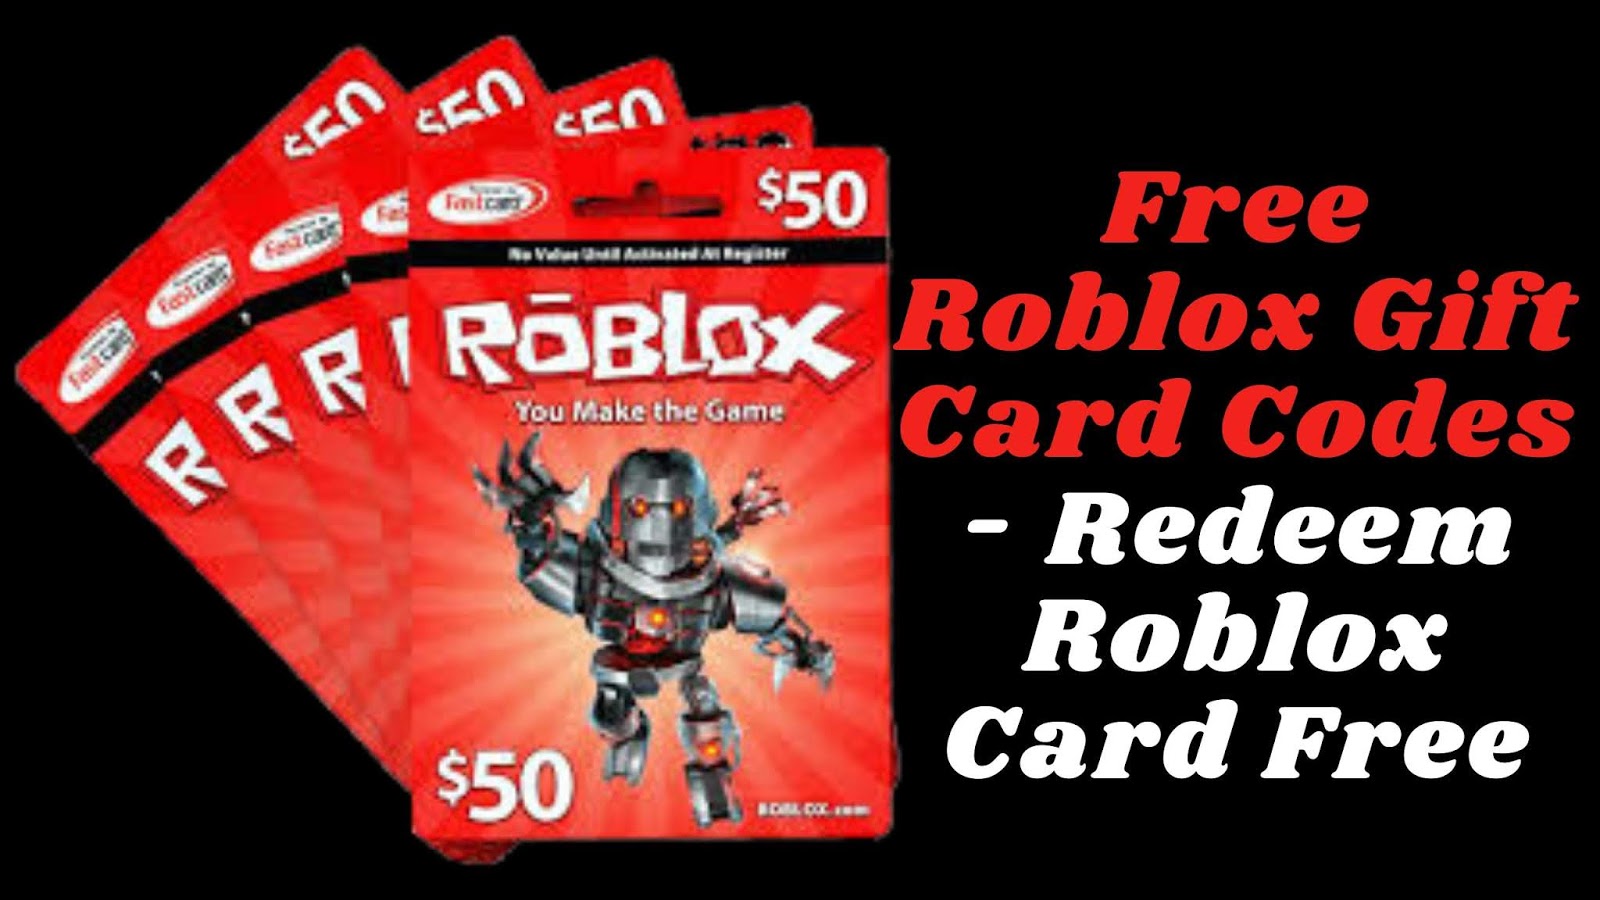 Free Gift Cards Free Roblox Gift Card Codes Redeem Roblox Card Free - roblox redeem card free 2020